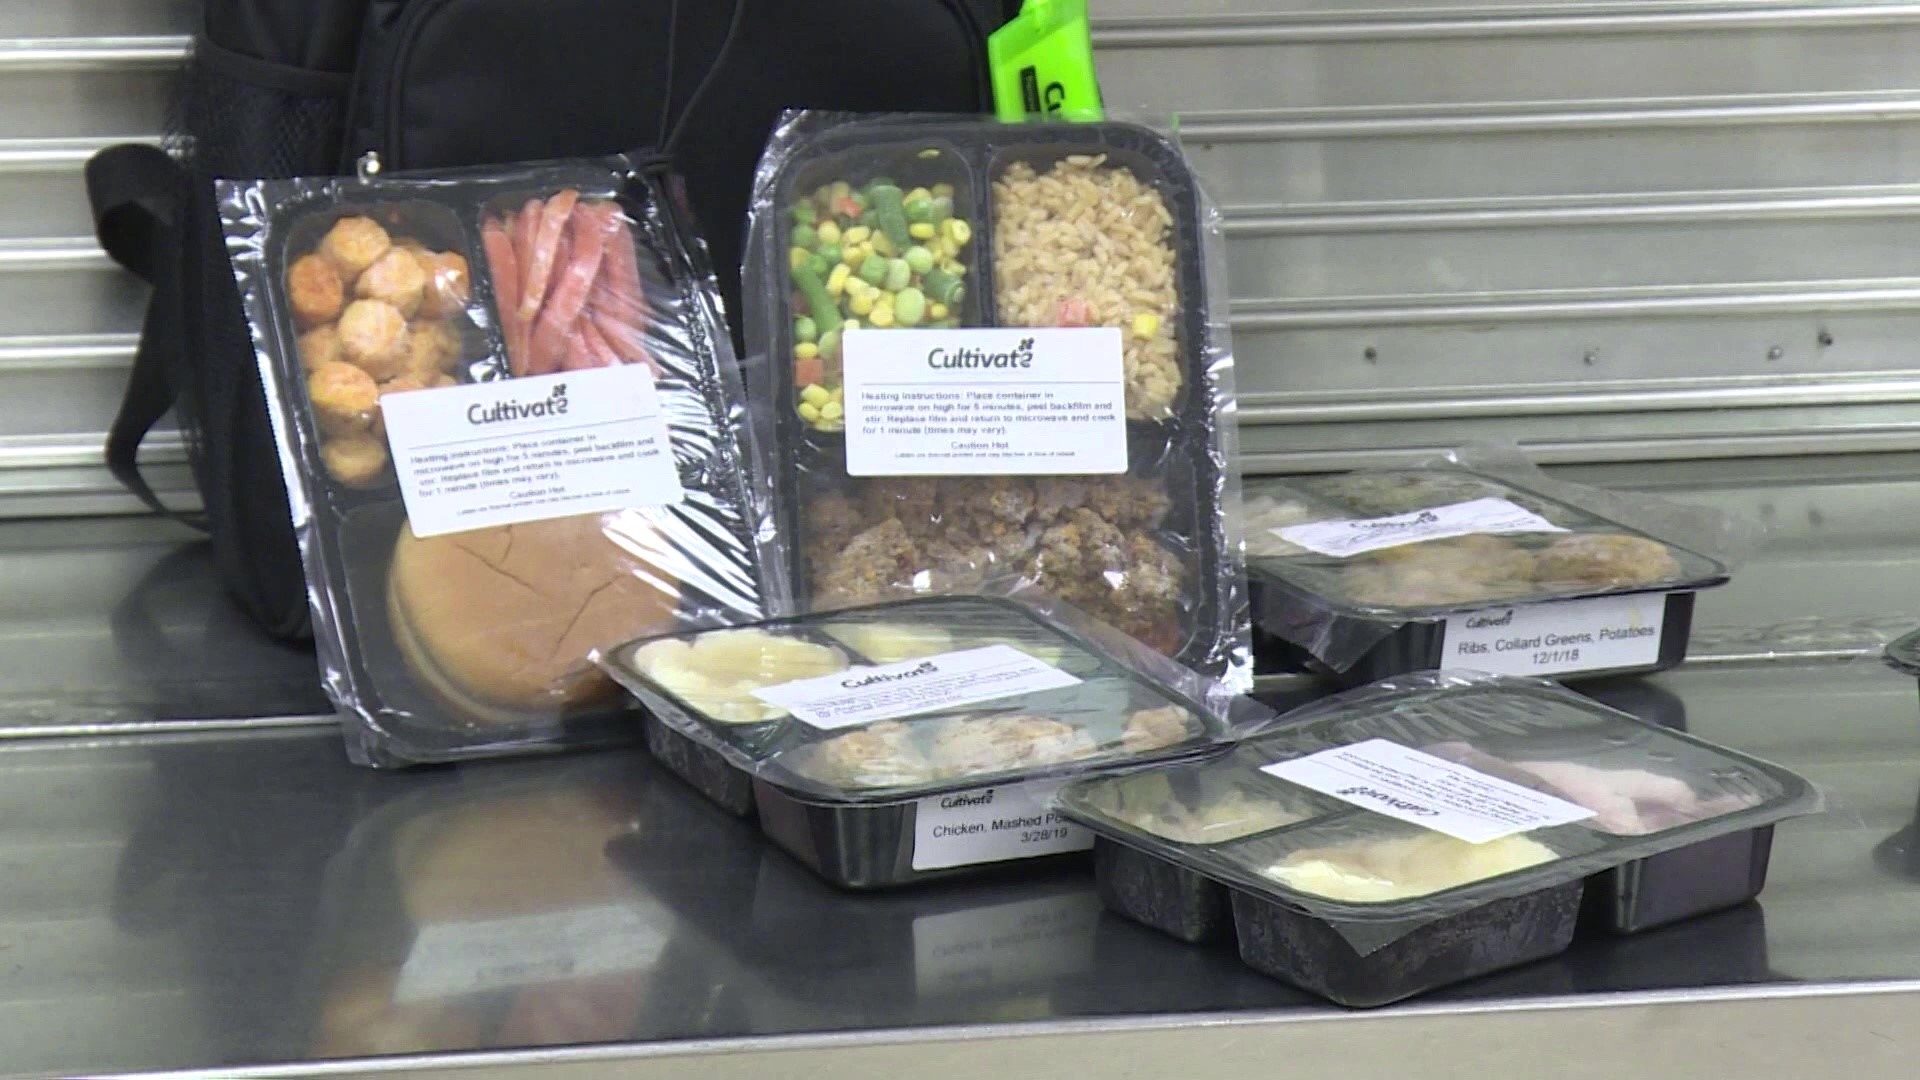 The non-profit group named Cultivate is taking leftover food from school lunches and turning it into take home meals for students.